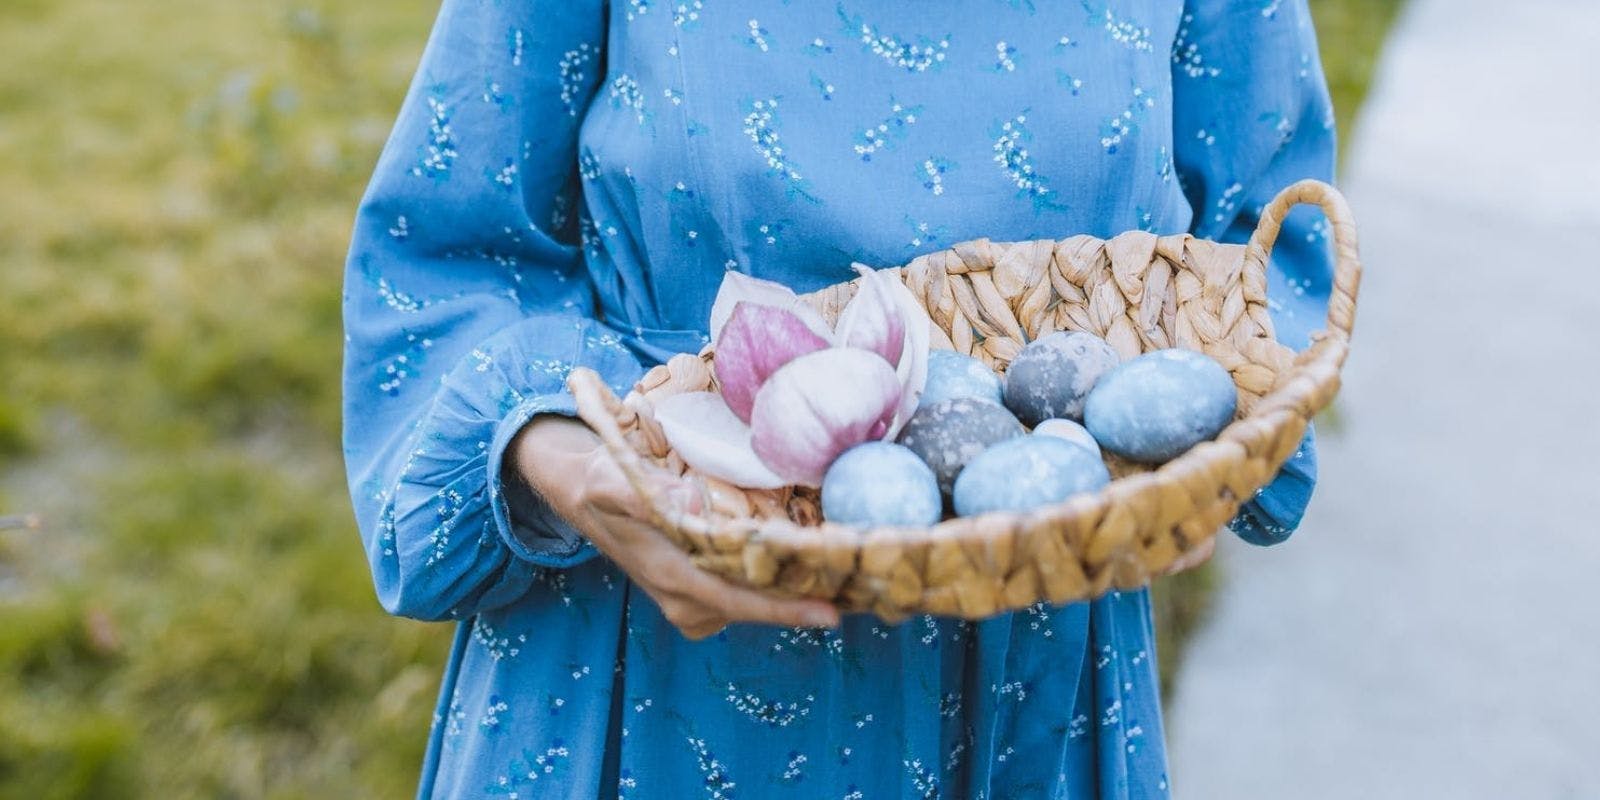 5 Things to Make The Perfect PMS Easter Basket